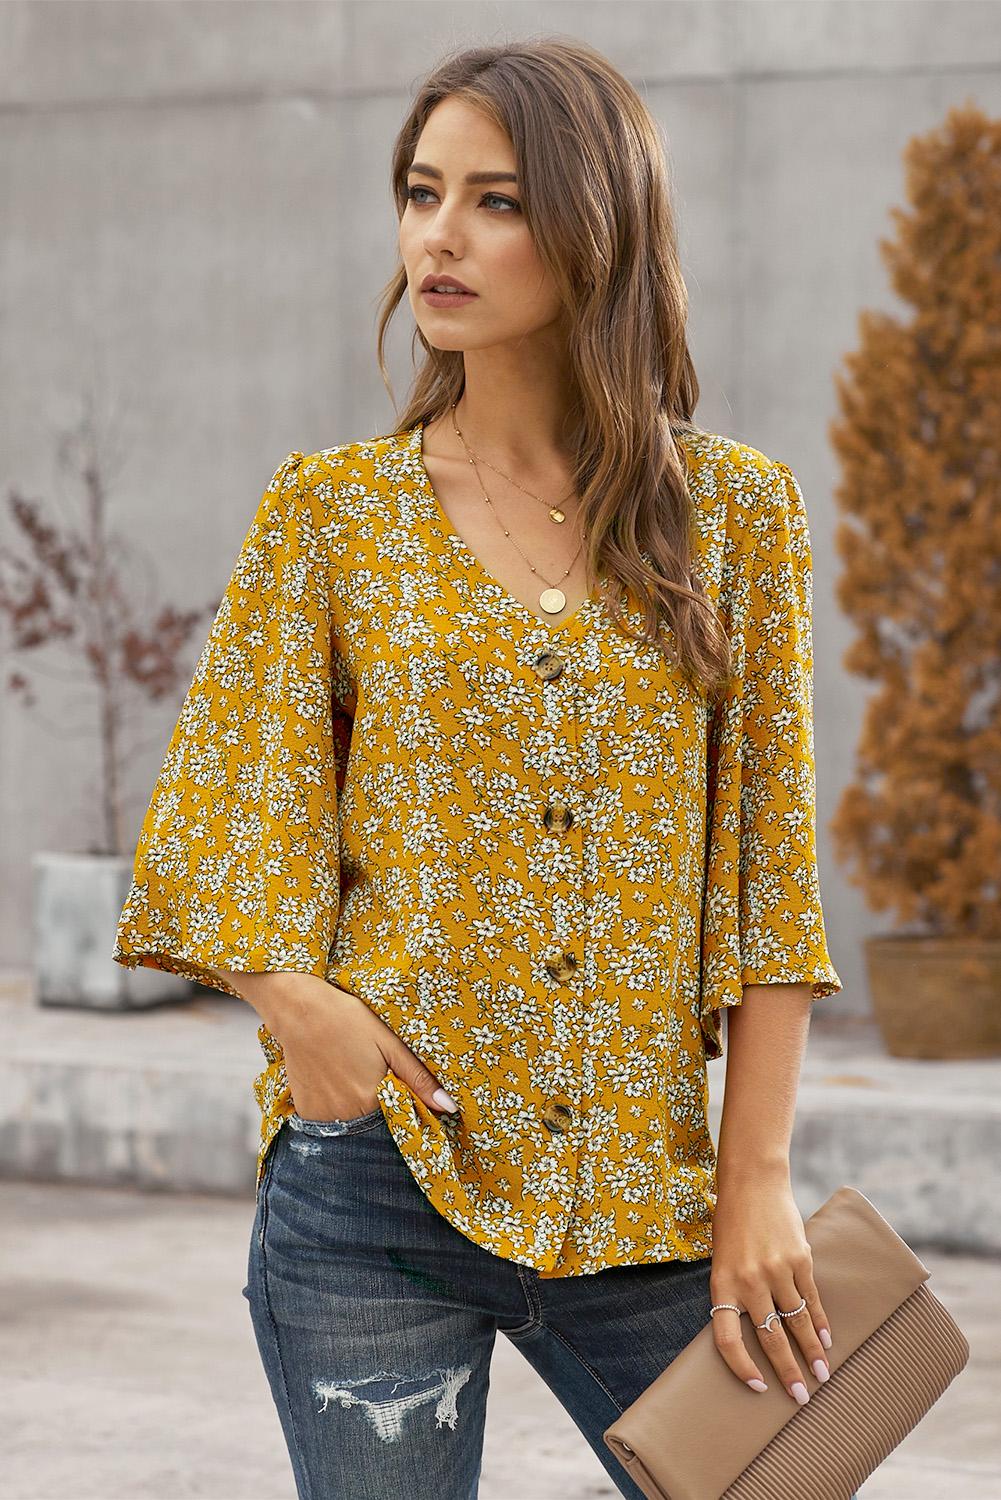 Yellow Women's Casual V-Neck 3/4 Bell Sleeves Leopard Print Button Down Blouse Shirt For Summer LC253233-7